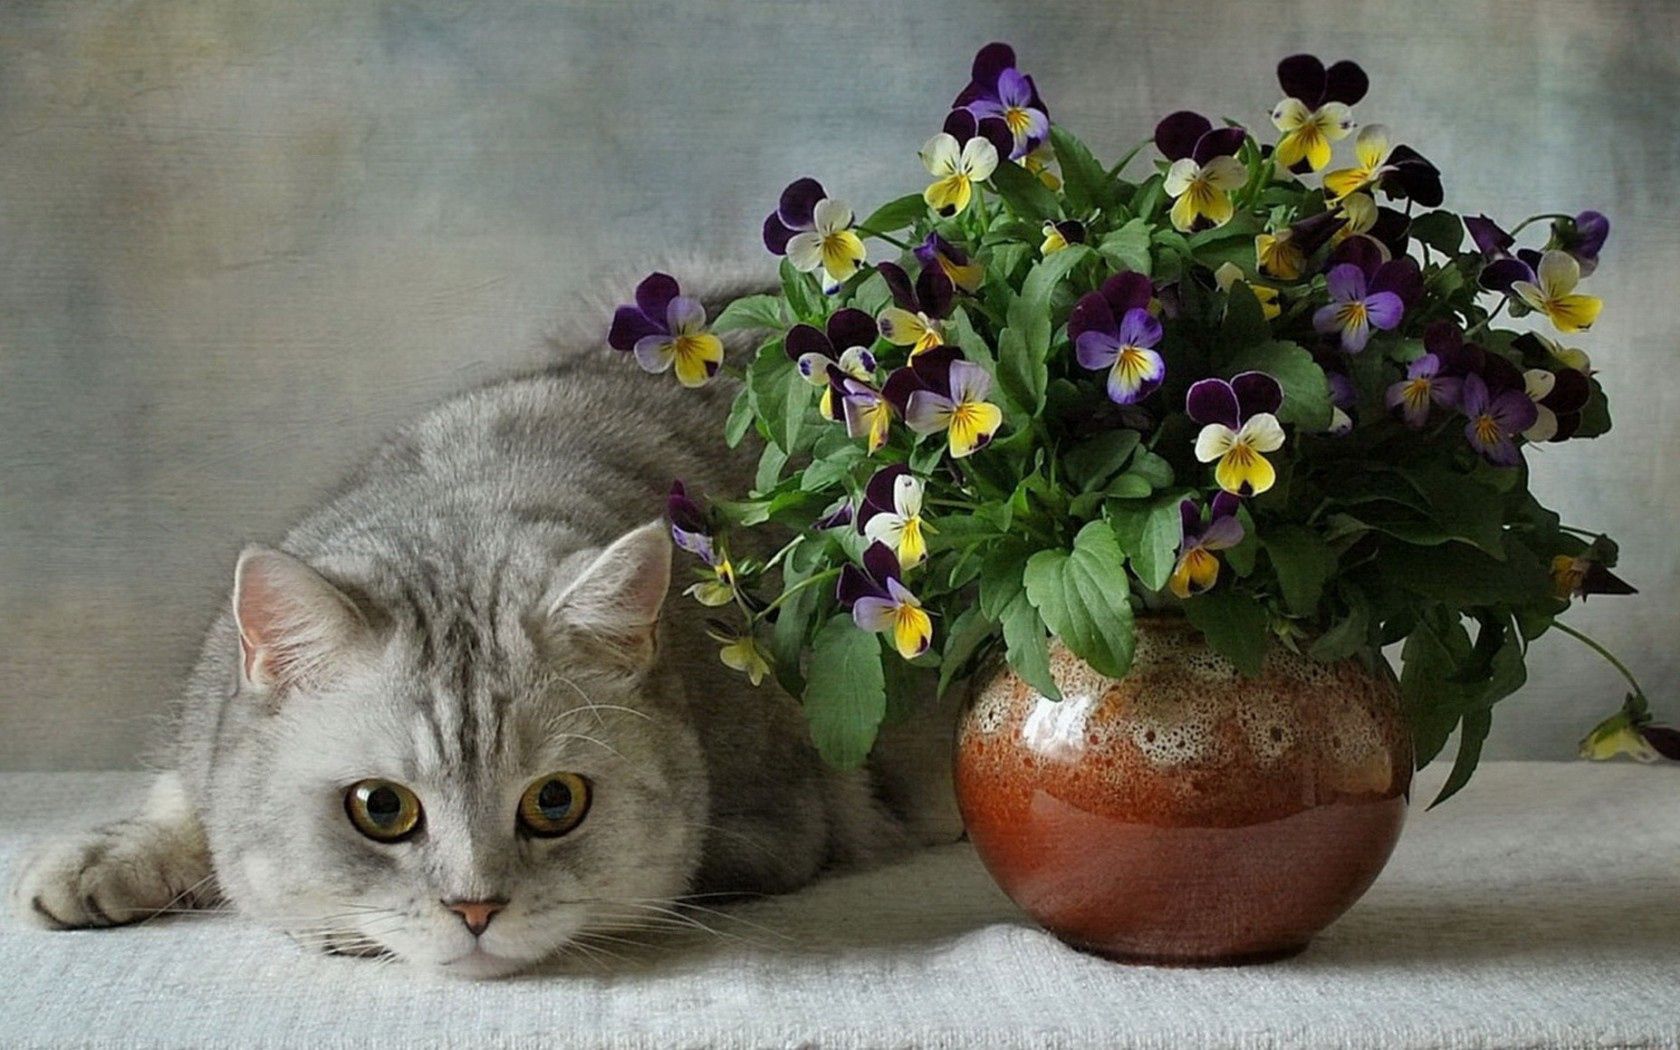 57193 download wallpaper animals, cats, flowers, pansies, blue, bouquet, vase, british, ceramics screensavers and pictures for free